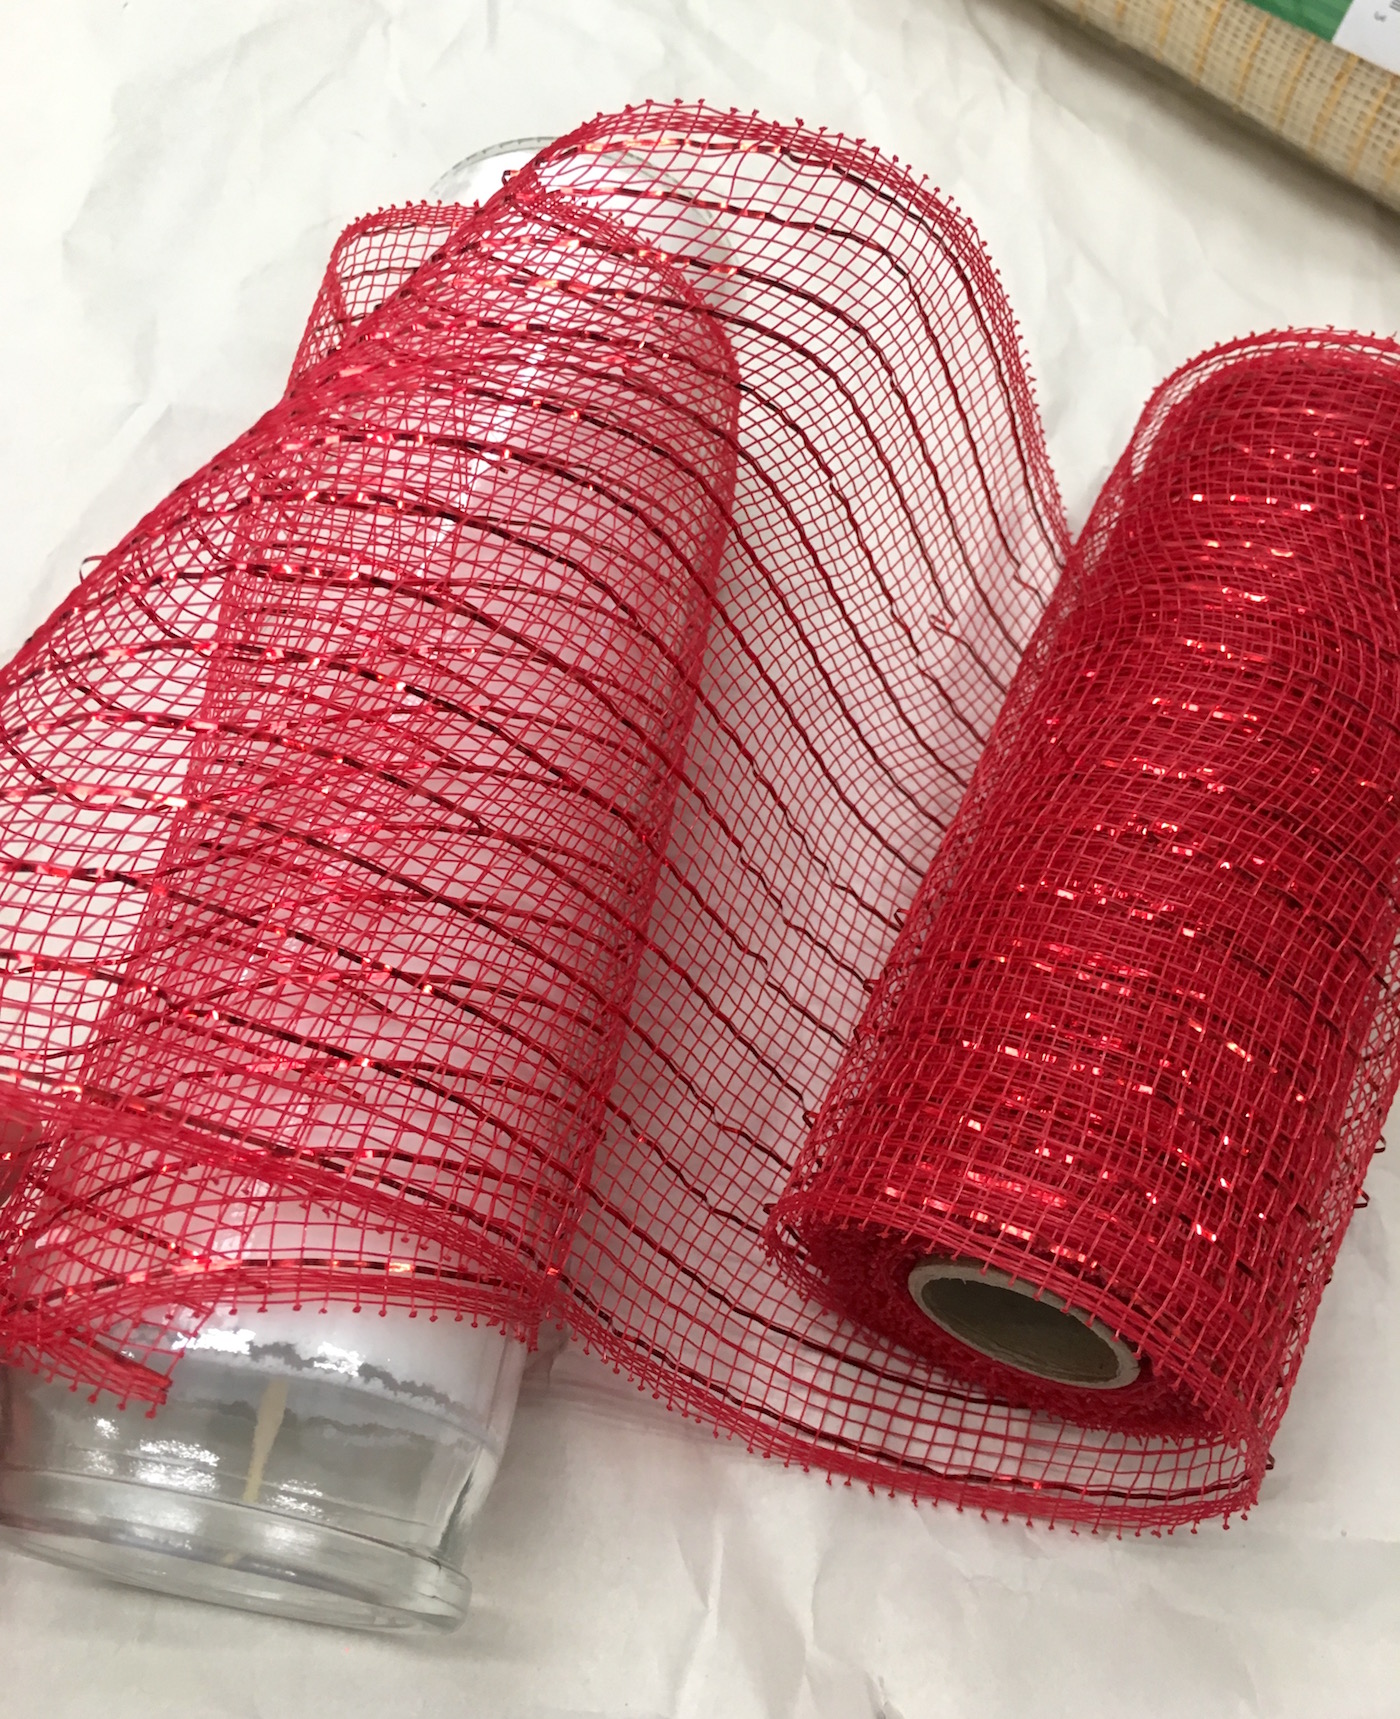 Roll of deco mesh rolled partially around a 12 inch glass candle